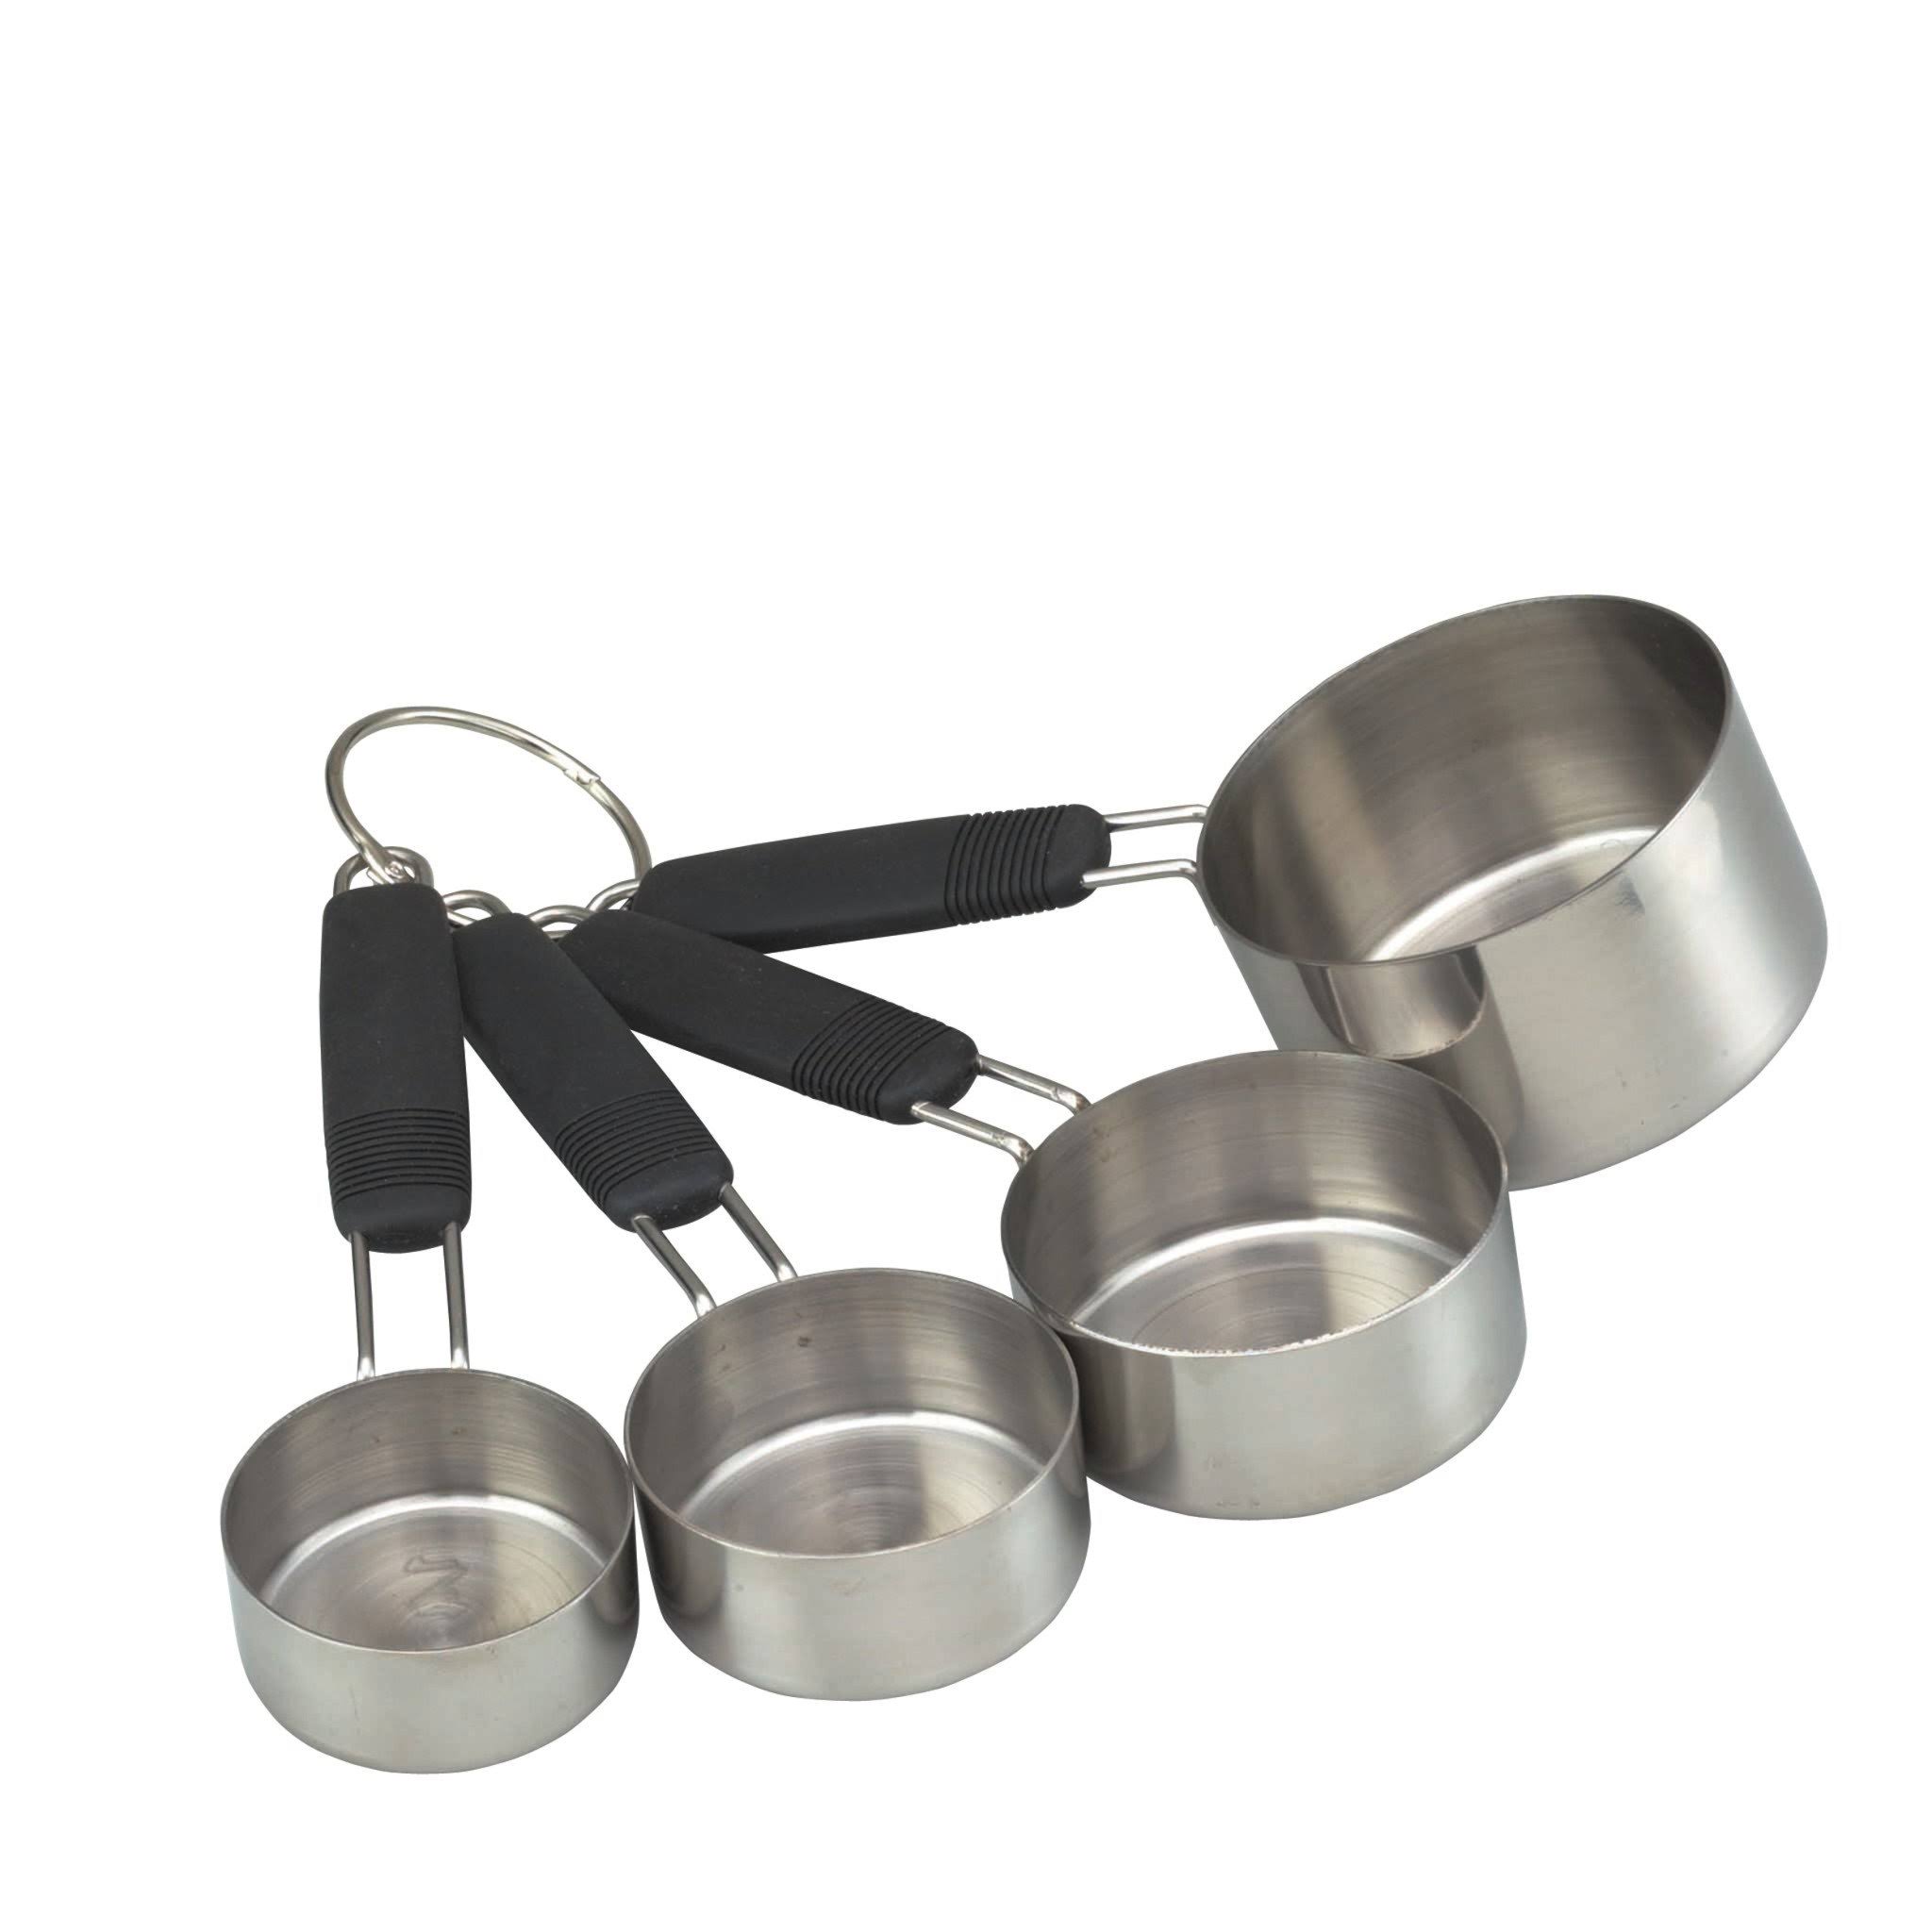 Master Class Professional Stainless Steel 4-Piece Measuring Cup Set